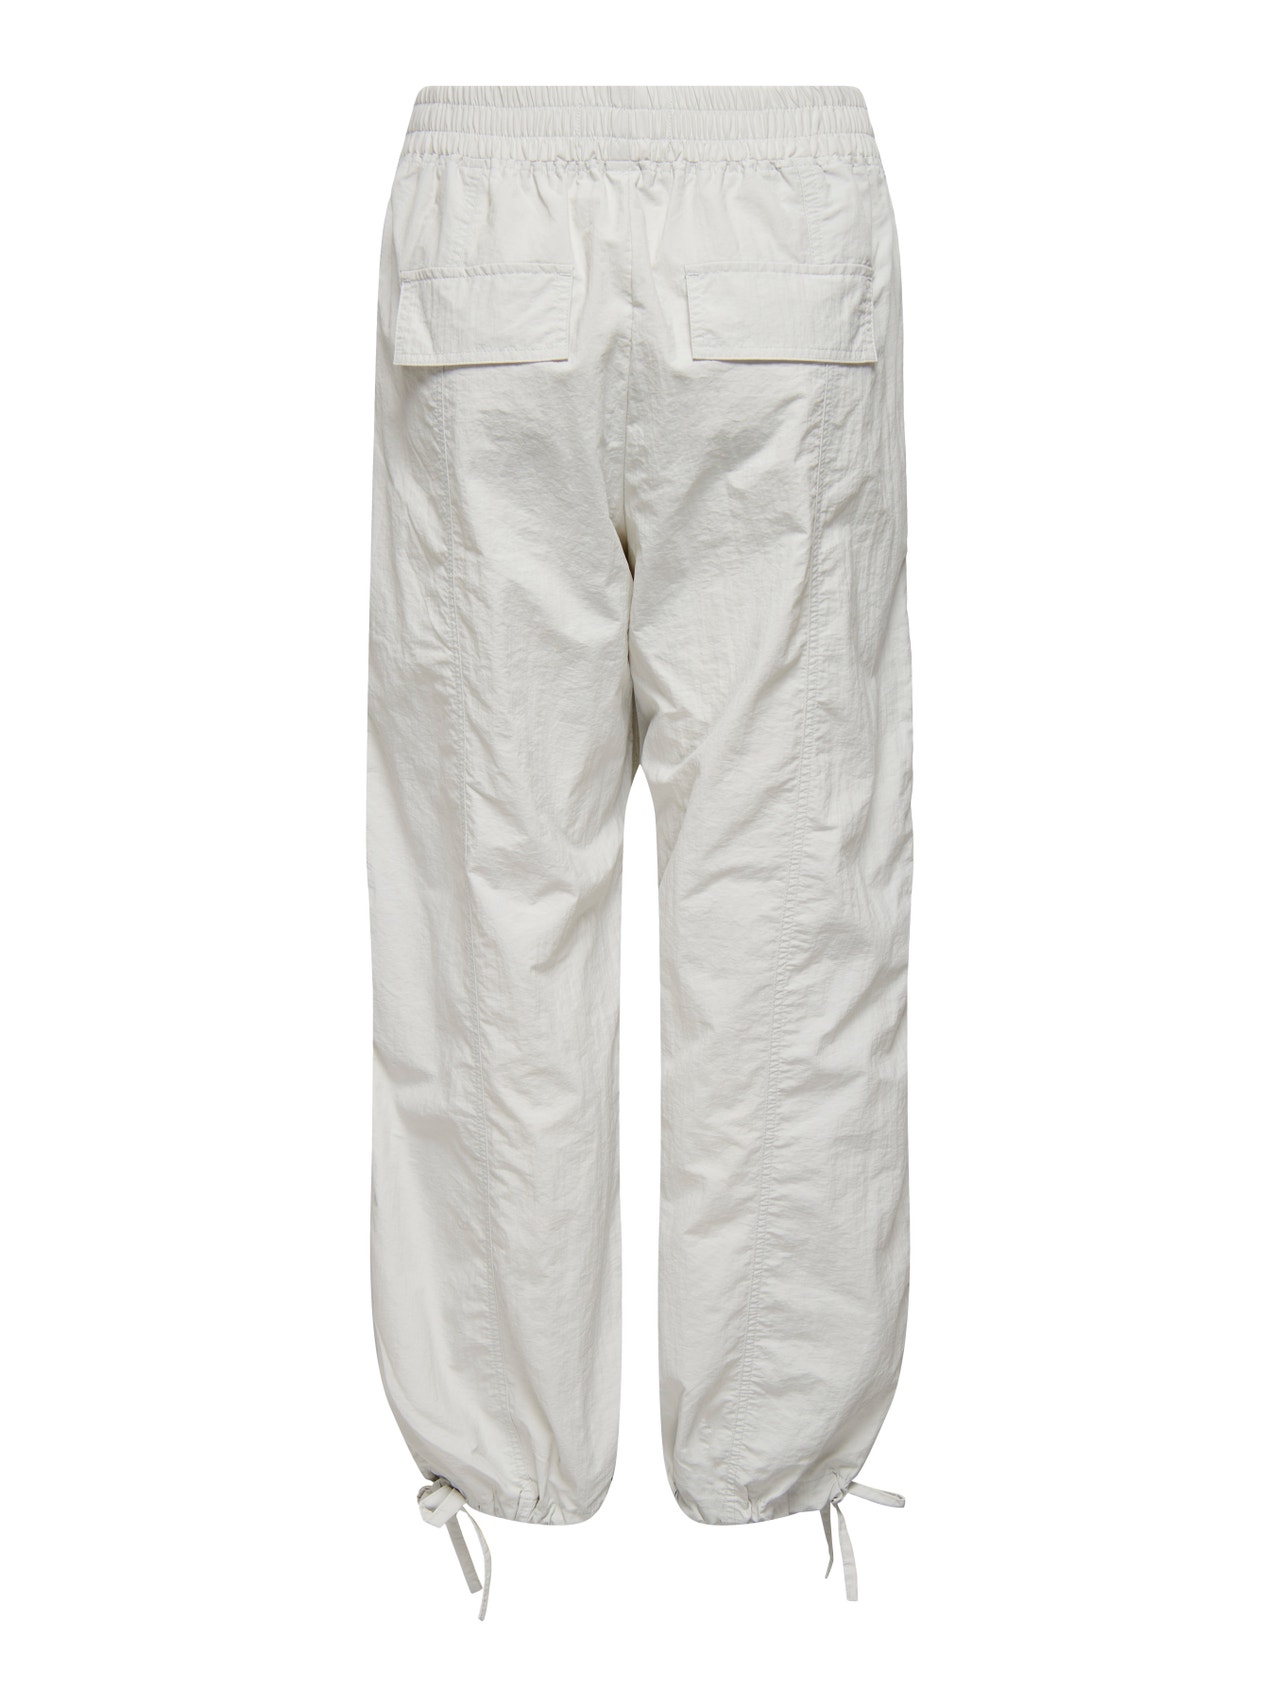 ONLY MW CARGO PARACHUTE PANT -Glacier Gray - 15302732